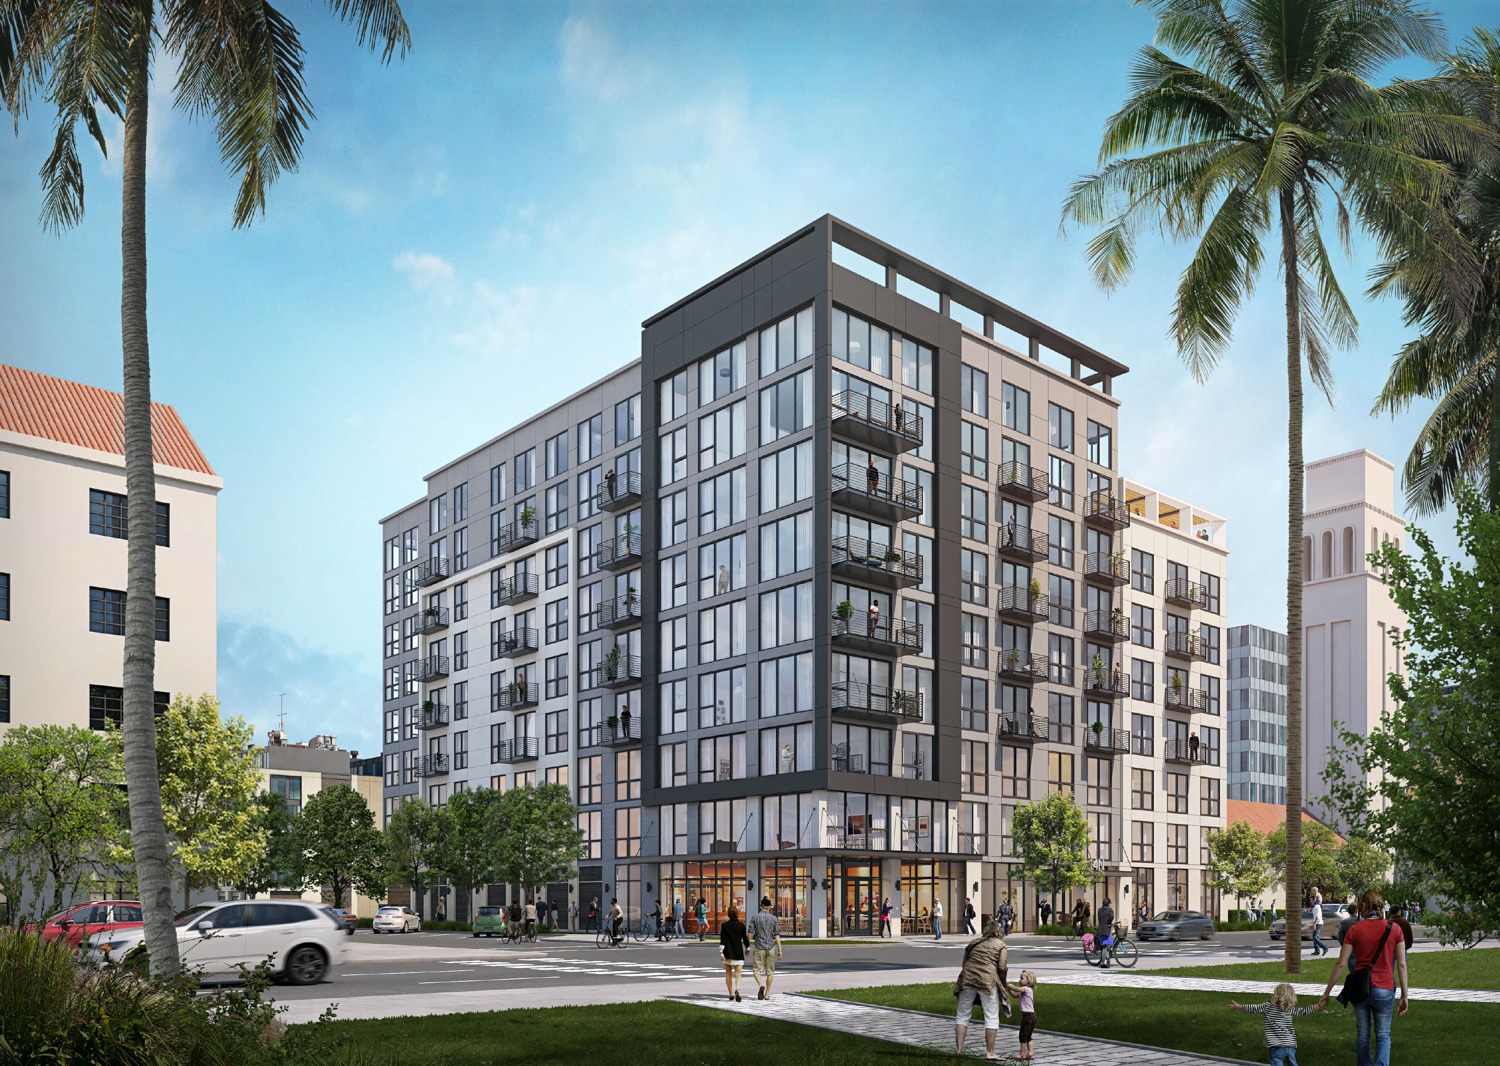 The Warren at 1330 N Street, rendering by HRGA Architecture circa April 2021